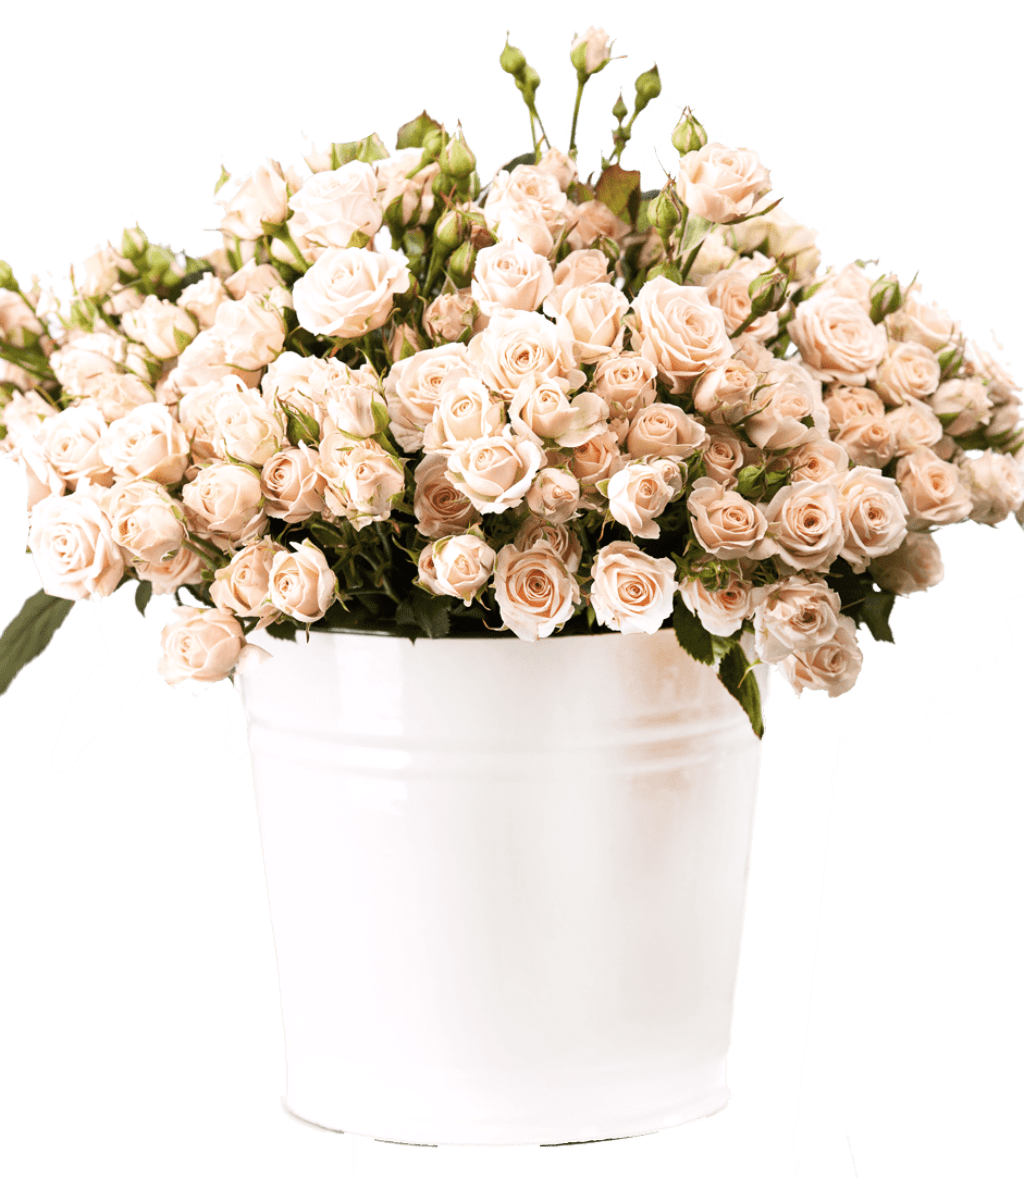 _shop-flower_wp-content_uploads_sites_158_2020_03_bunch-of-creamy-roses-in-a-bucket-over-white-PLJ554Y-e1585206356671-1024x1178